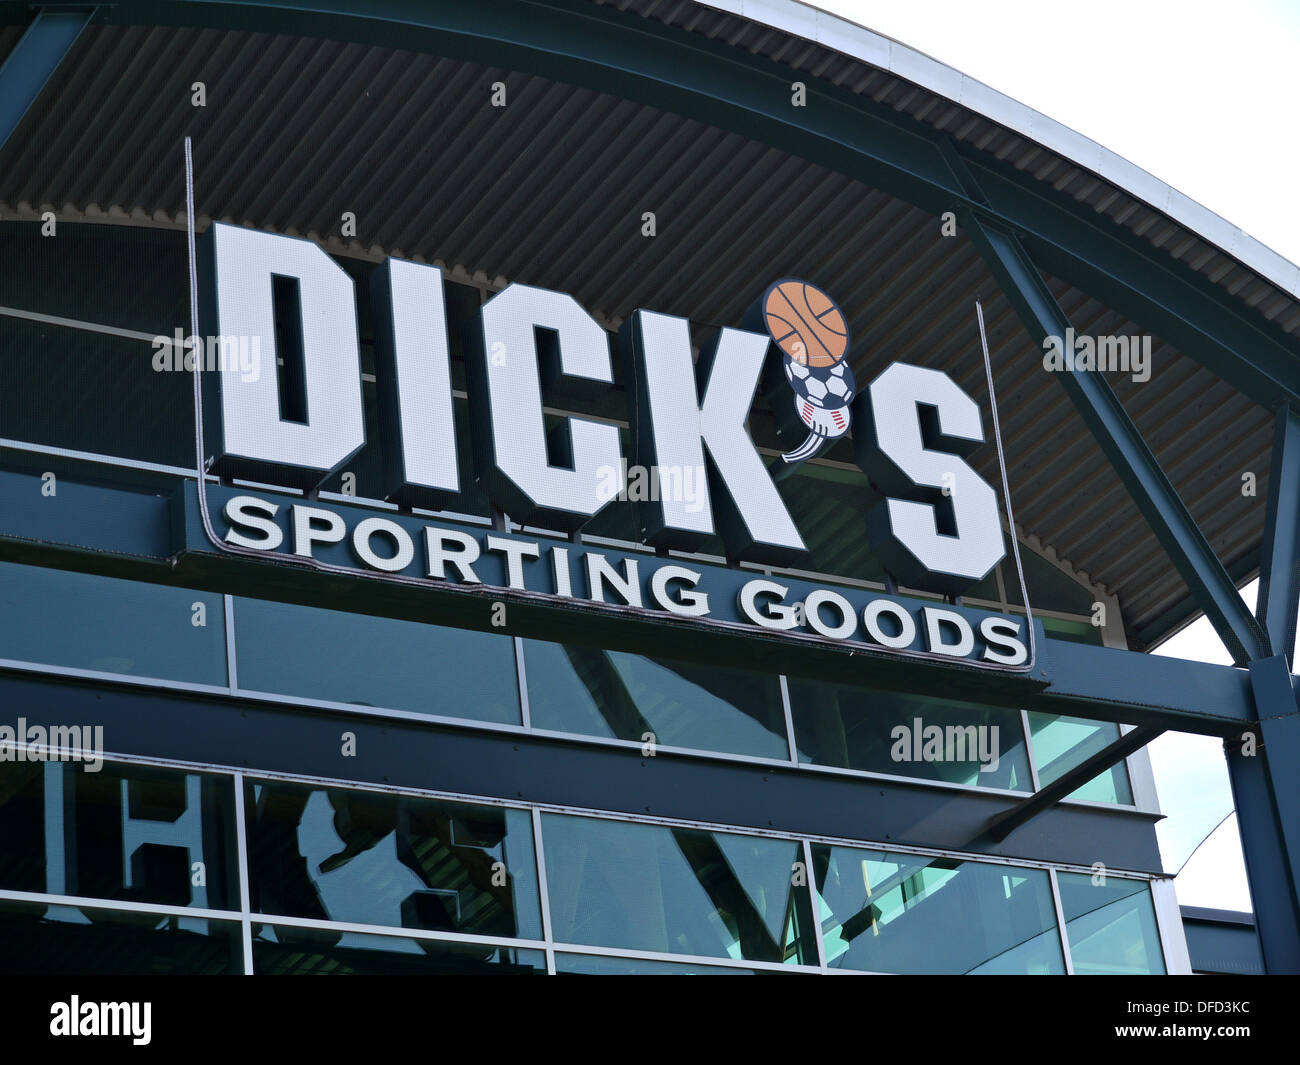 A image of a Dick's Sporting Goods Store sign in Arlington Texas on a overcast day Stock Photo